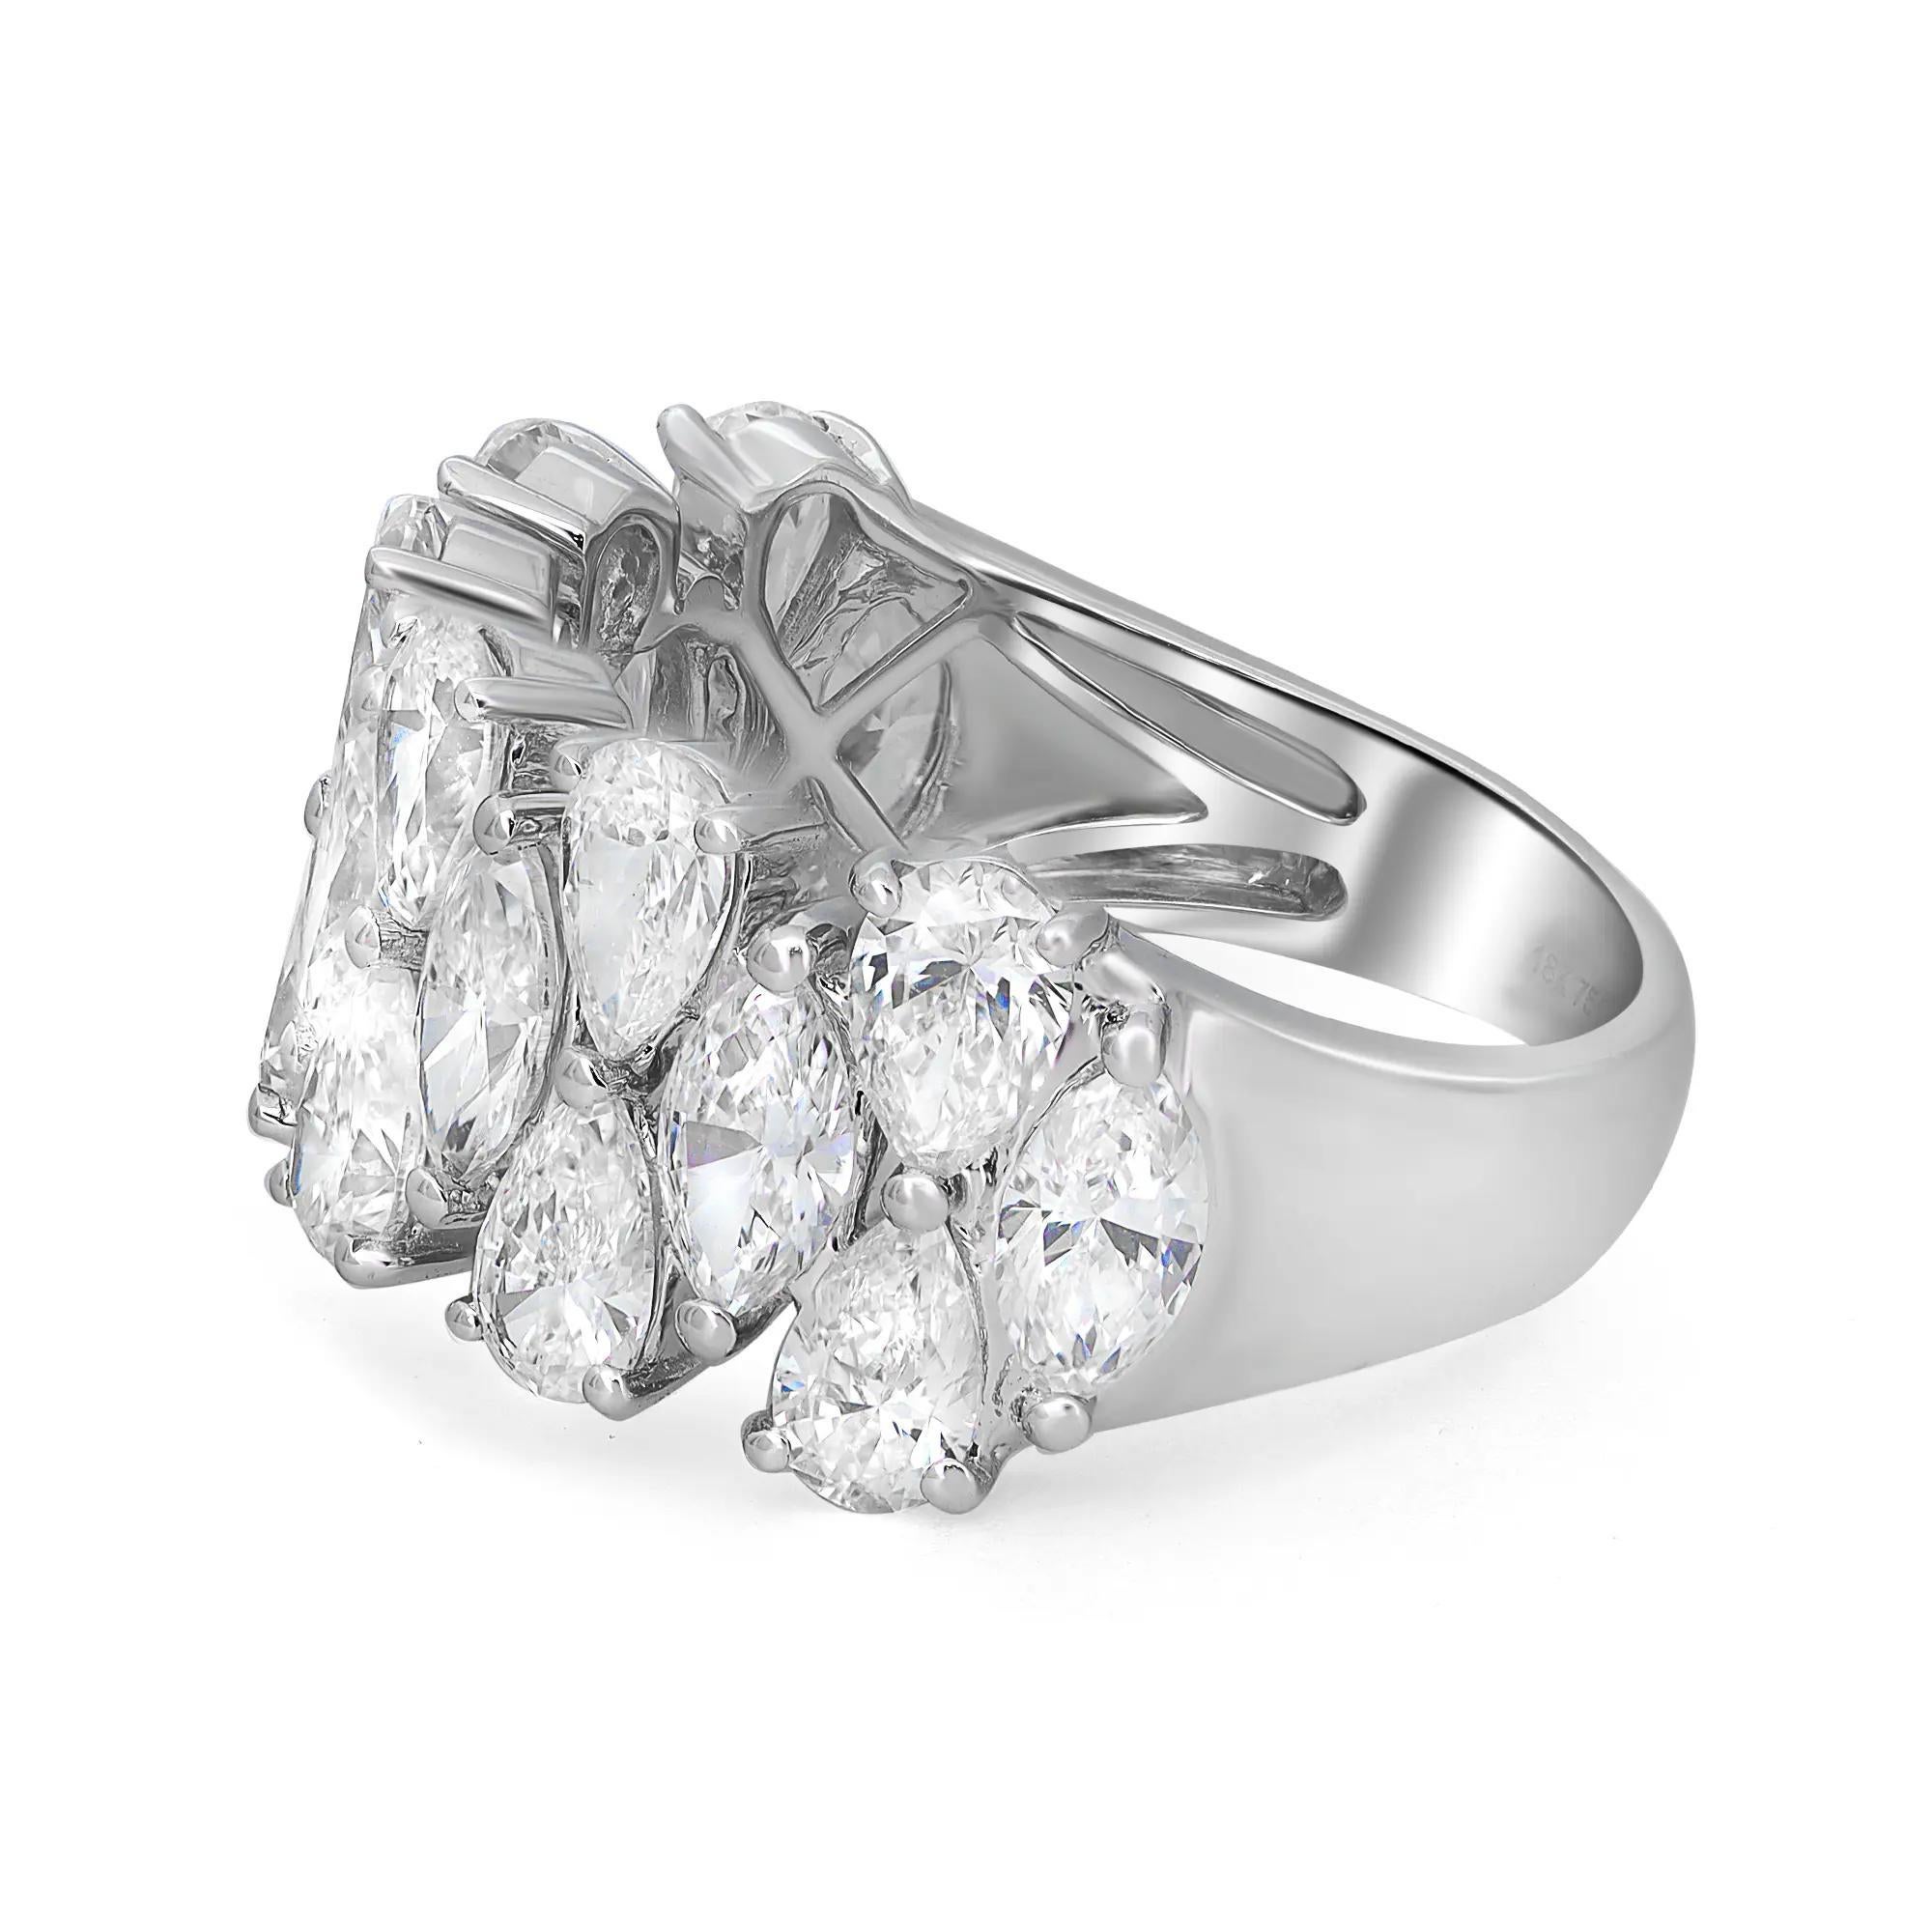 For Sale:  3.93 Carat  Marquise & Pear Shape Diamond Fashion Ring 18K White Gold  2